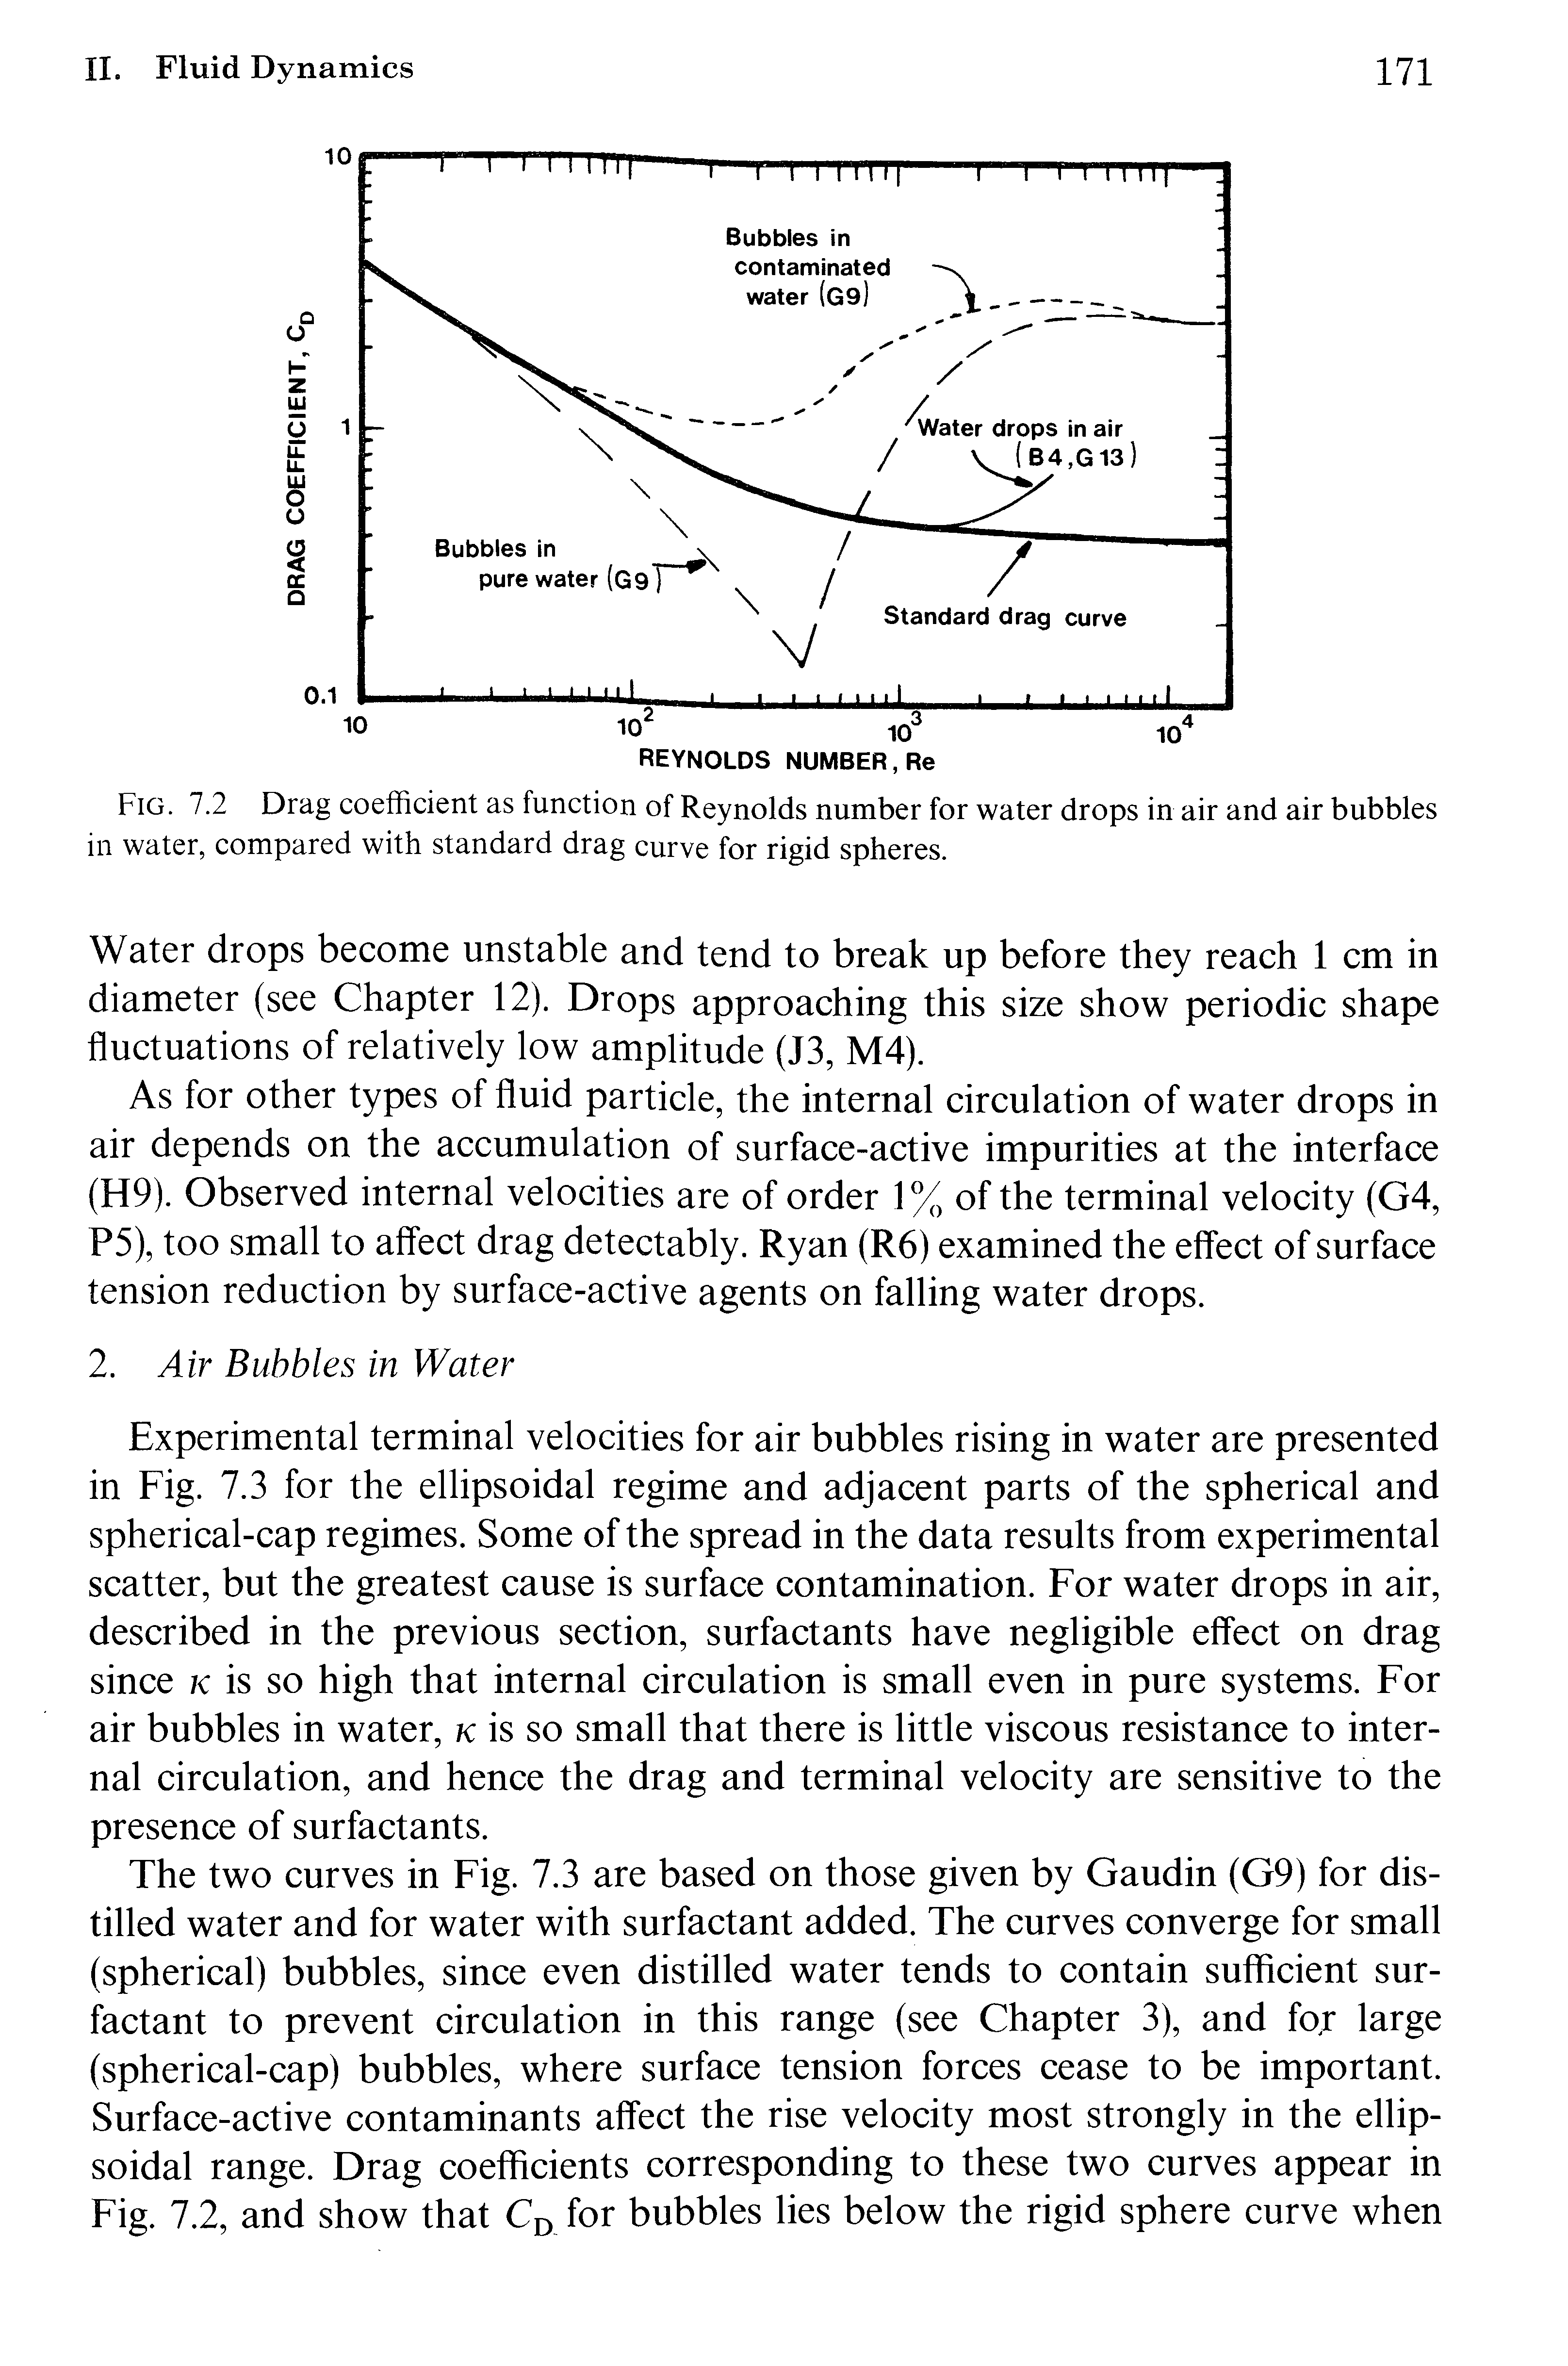 Fig. 7.2 Drag coefficient as function of Reynolds number for water drops in air and air bubbles in water, compared with standard drag curve for rigid spheres.